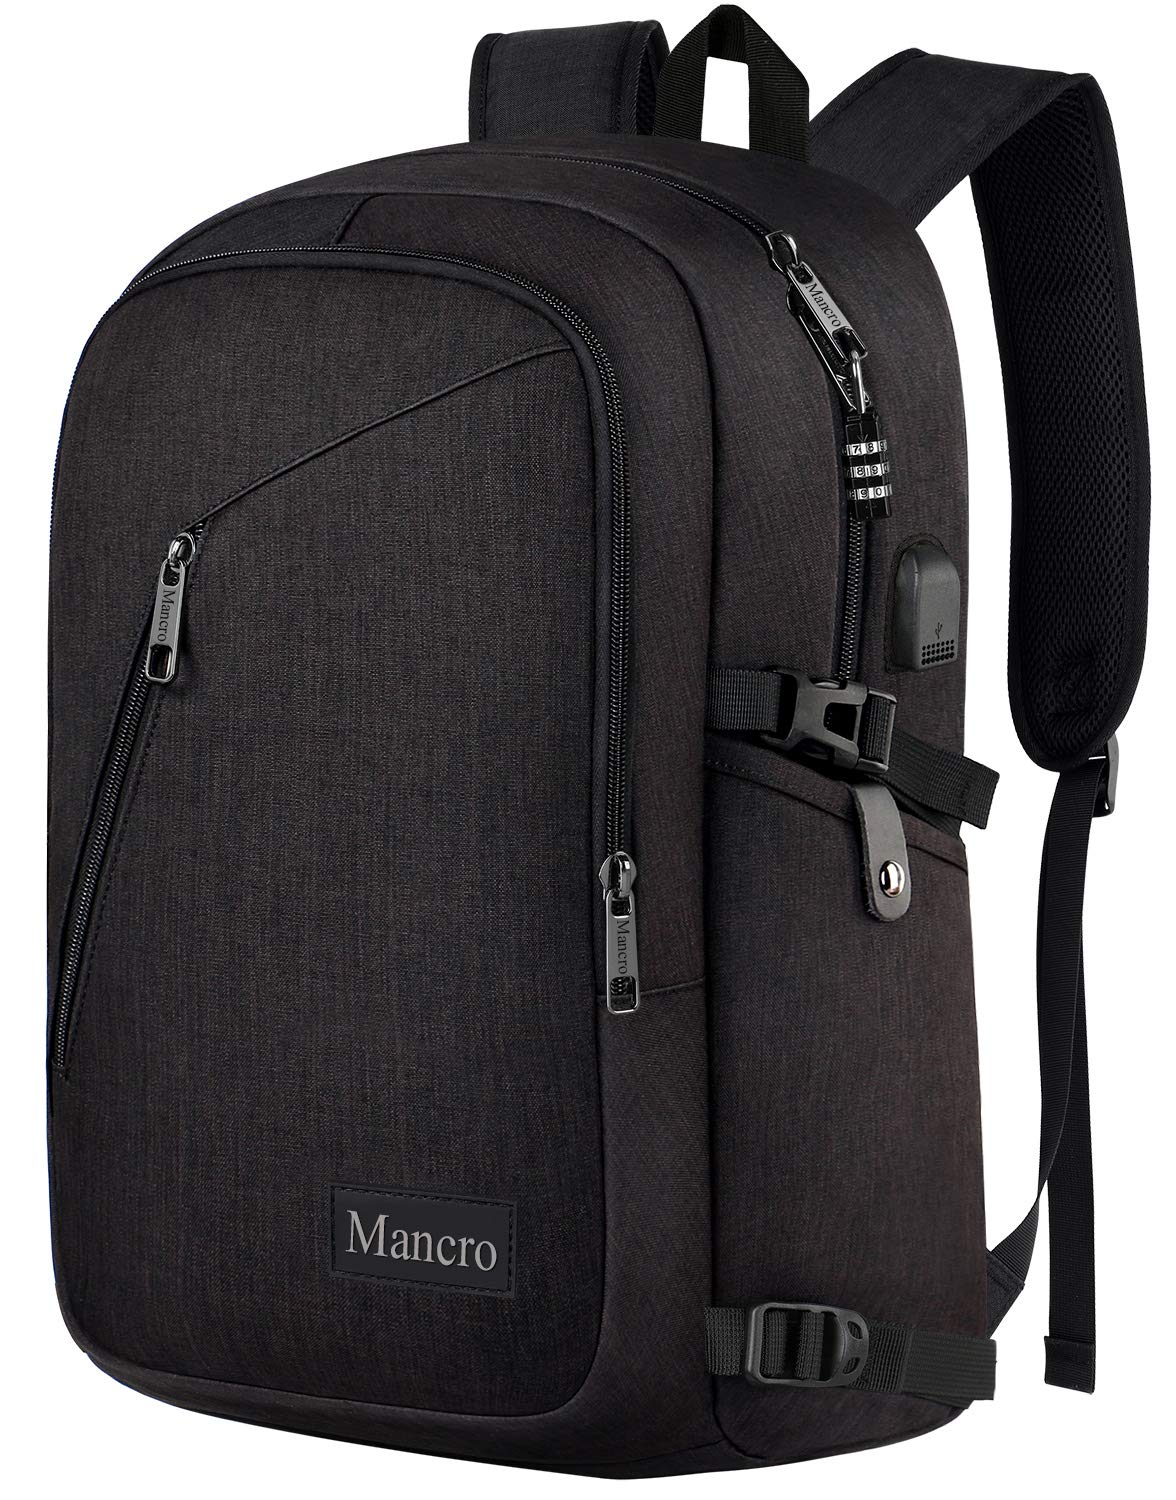 Anti Theft Business Laptop Backpack with USB Charging Port Fits 15.6 inch Laptop, Slim Travel College Bookbag for MacBook Computer, School Computer Bag for Women & Men by Mancro (Black) - image 1 of 7